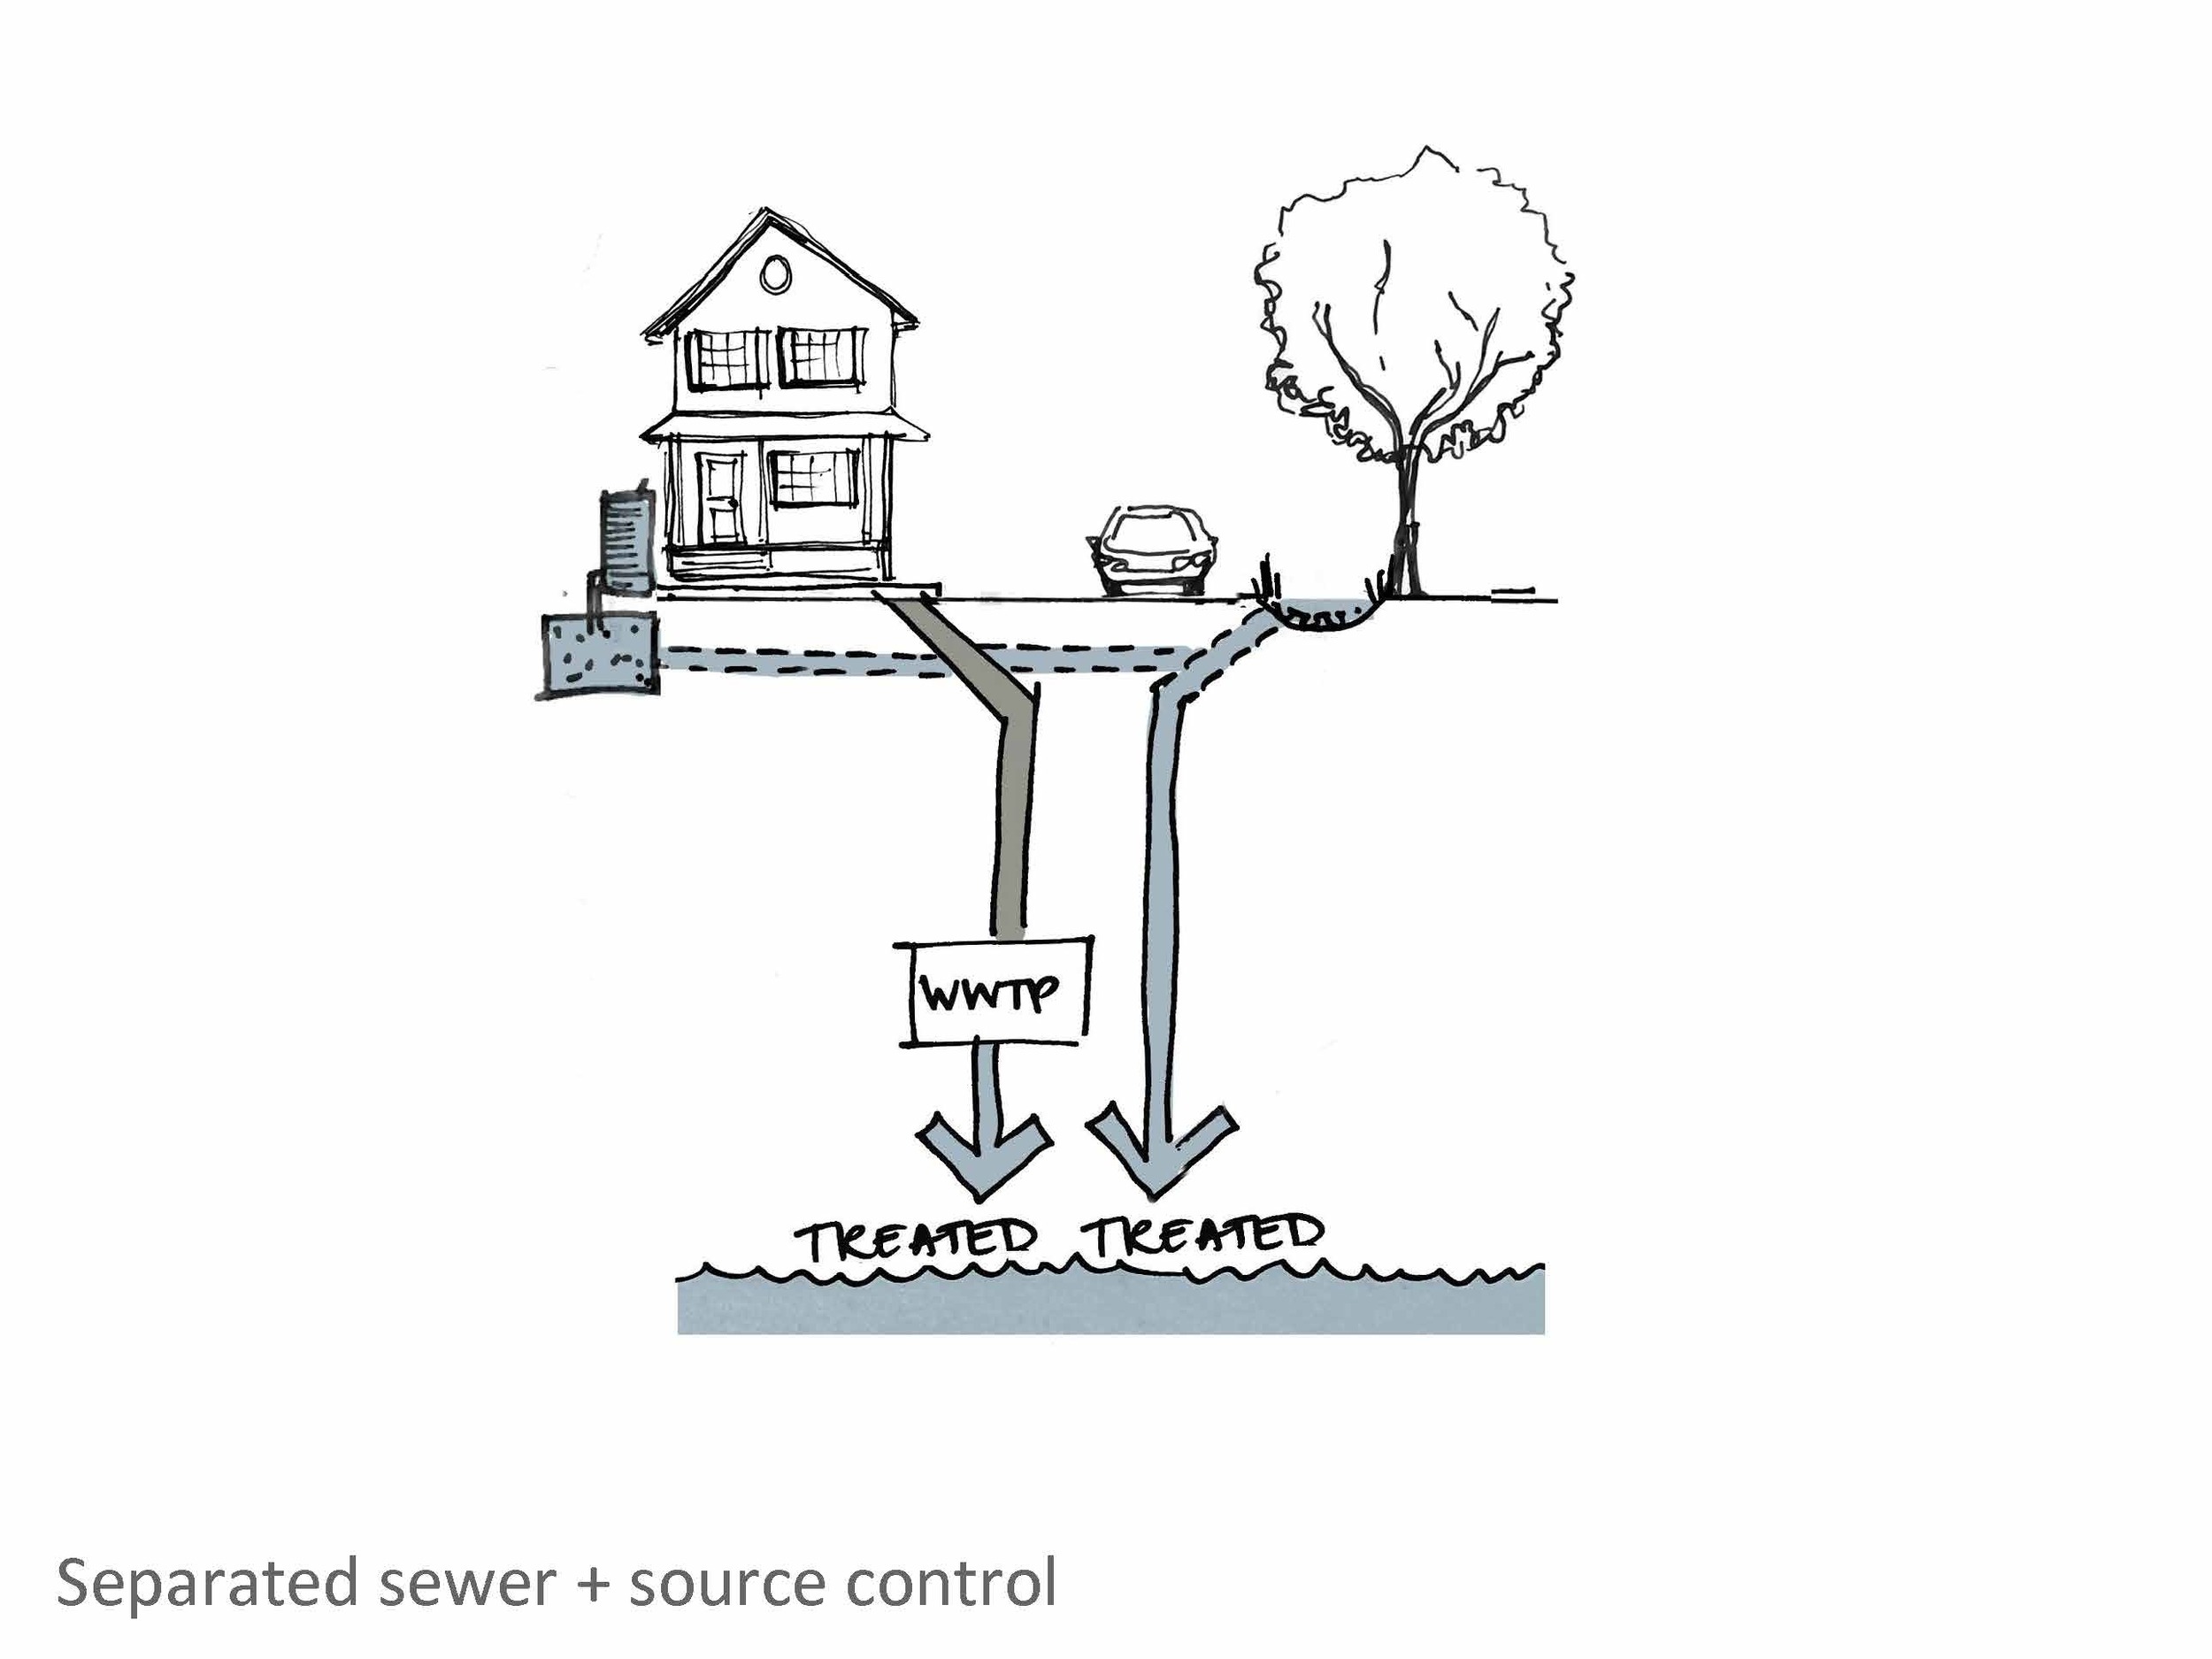  In areas of the city that already have separated sewer systems, incorporating surface-based stormwater management tools such as rainways will also have benefits, by filtering the stormwater before it is discharged to the ocean. 